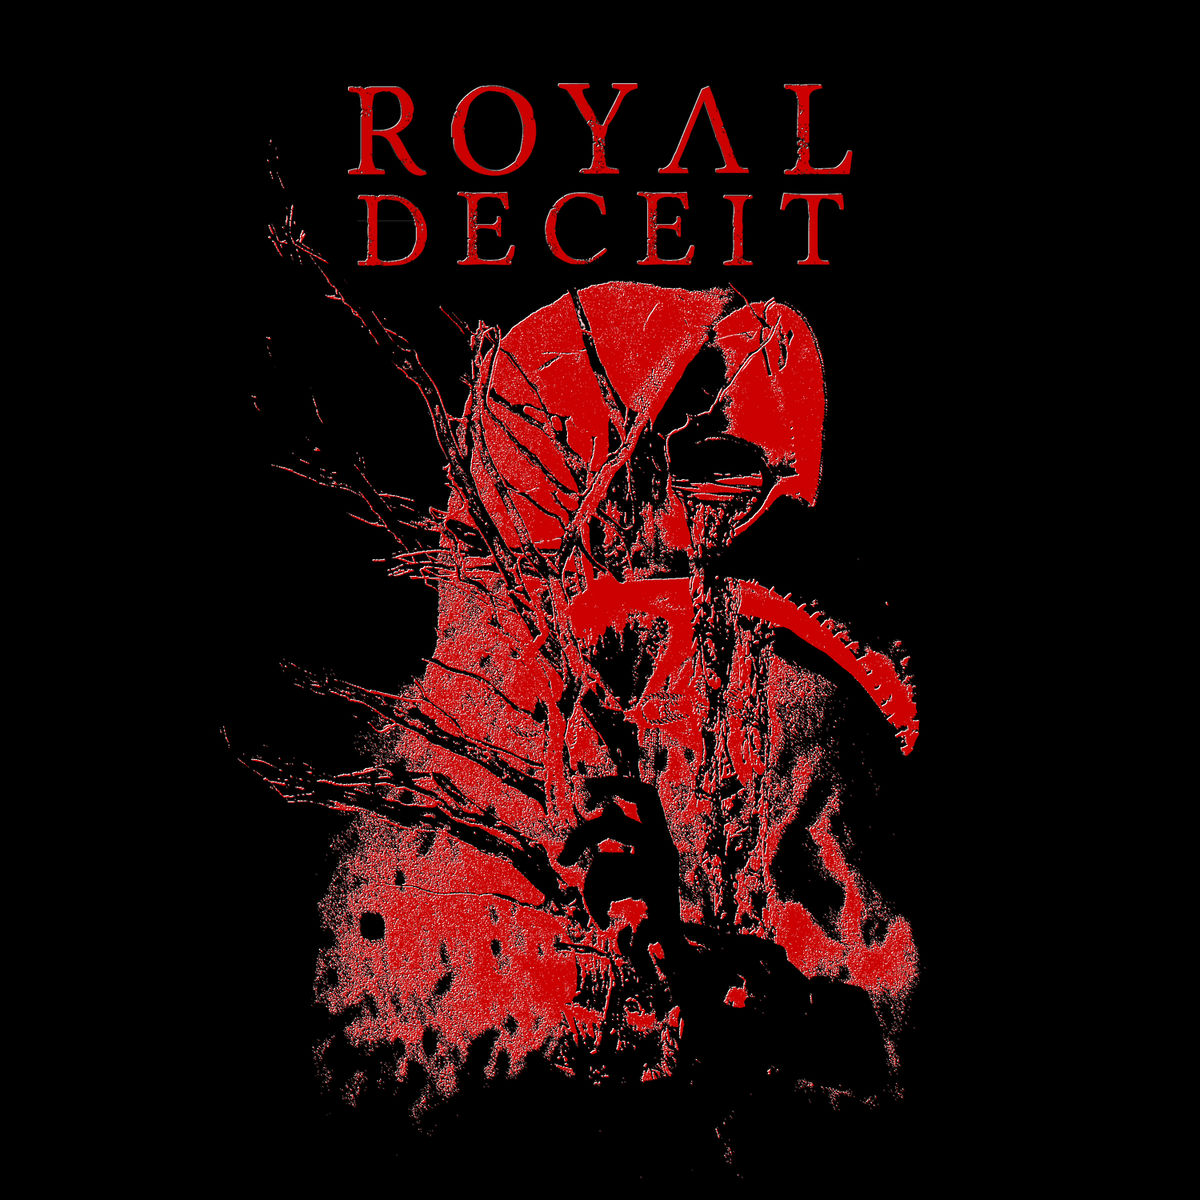 Royal Deceit - Echoes of Hate [Single] (2019)